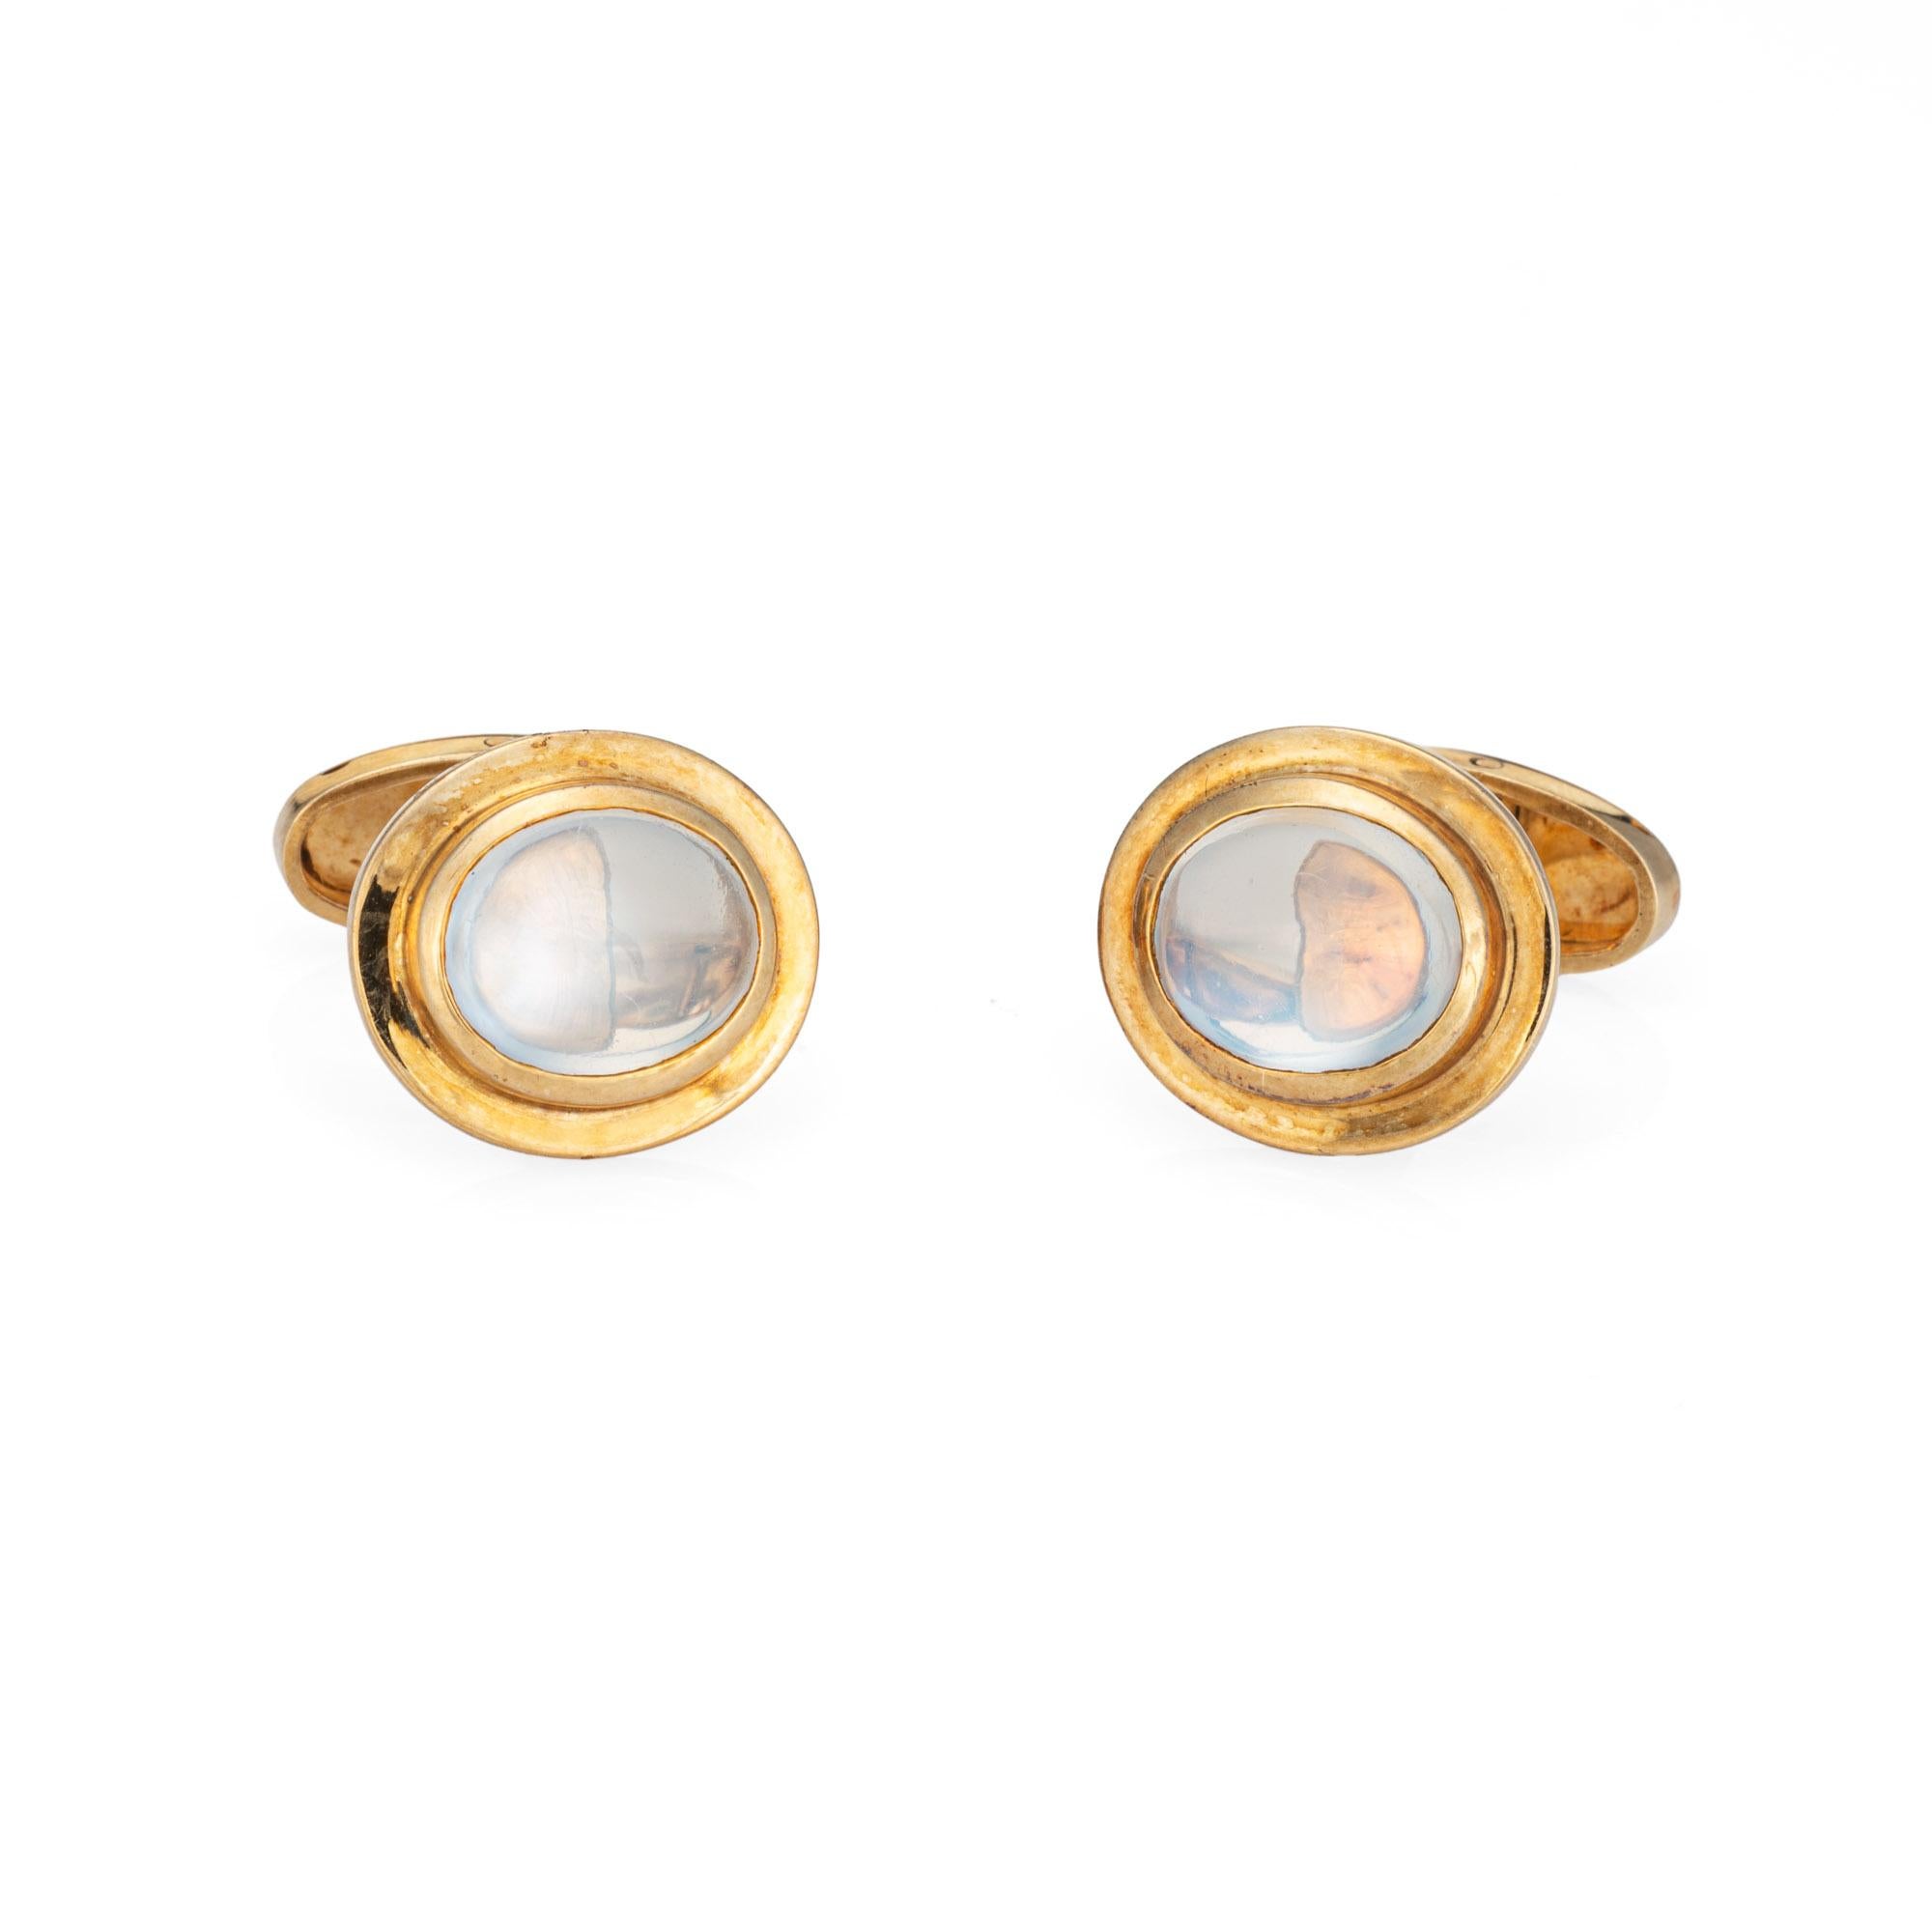 Cabochon cut moonstones each measure 11mm x 9mm. The cufflinks are in very good condition and free of cracks or chips.

The stylish cufflinks are bezel set with luminous rainbow moonstones. The cufflinks make a great statement worn during the day or